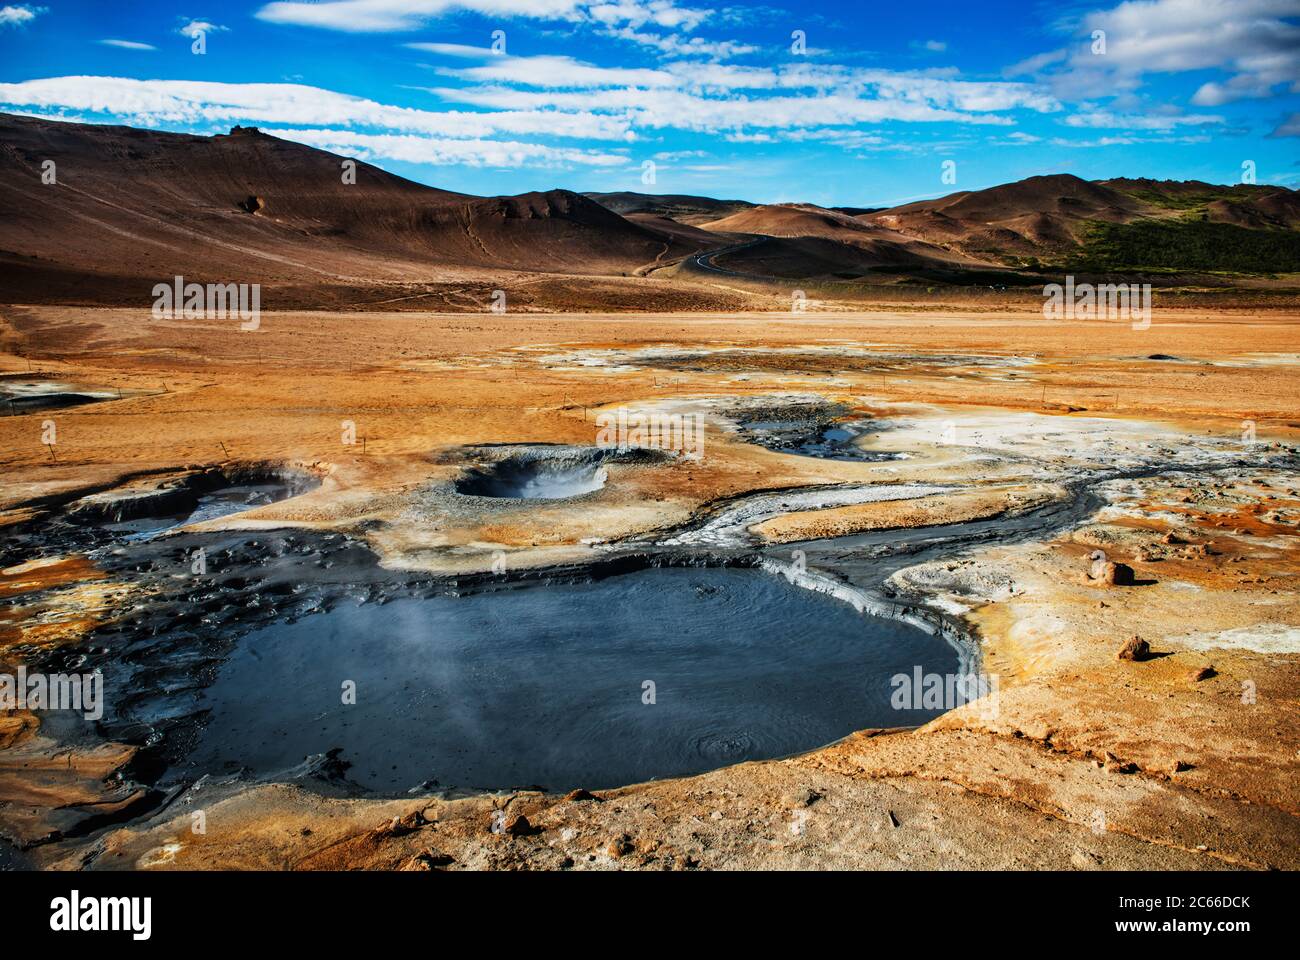 Hverir, a geothermal area known for its bubbling pools of mud & steaming fumaroles emitting sulfuric gas, Namafjall, Iceland Stock Photo